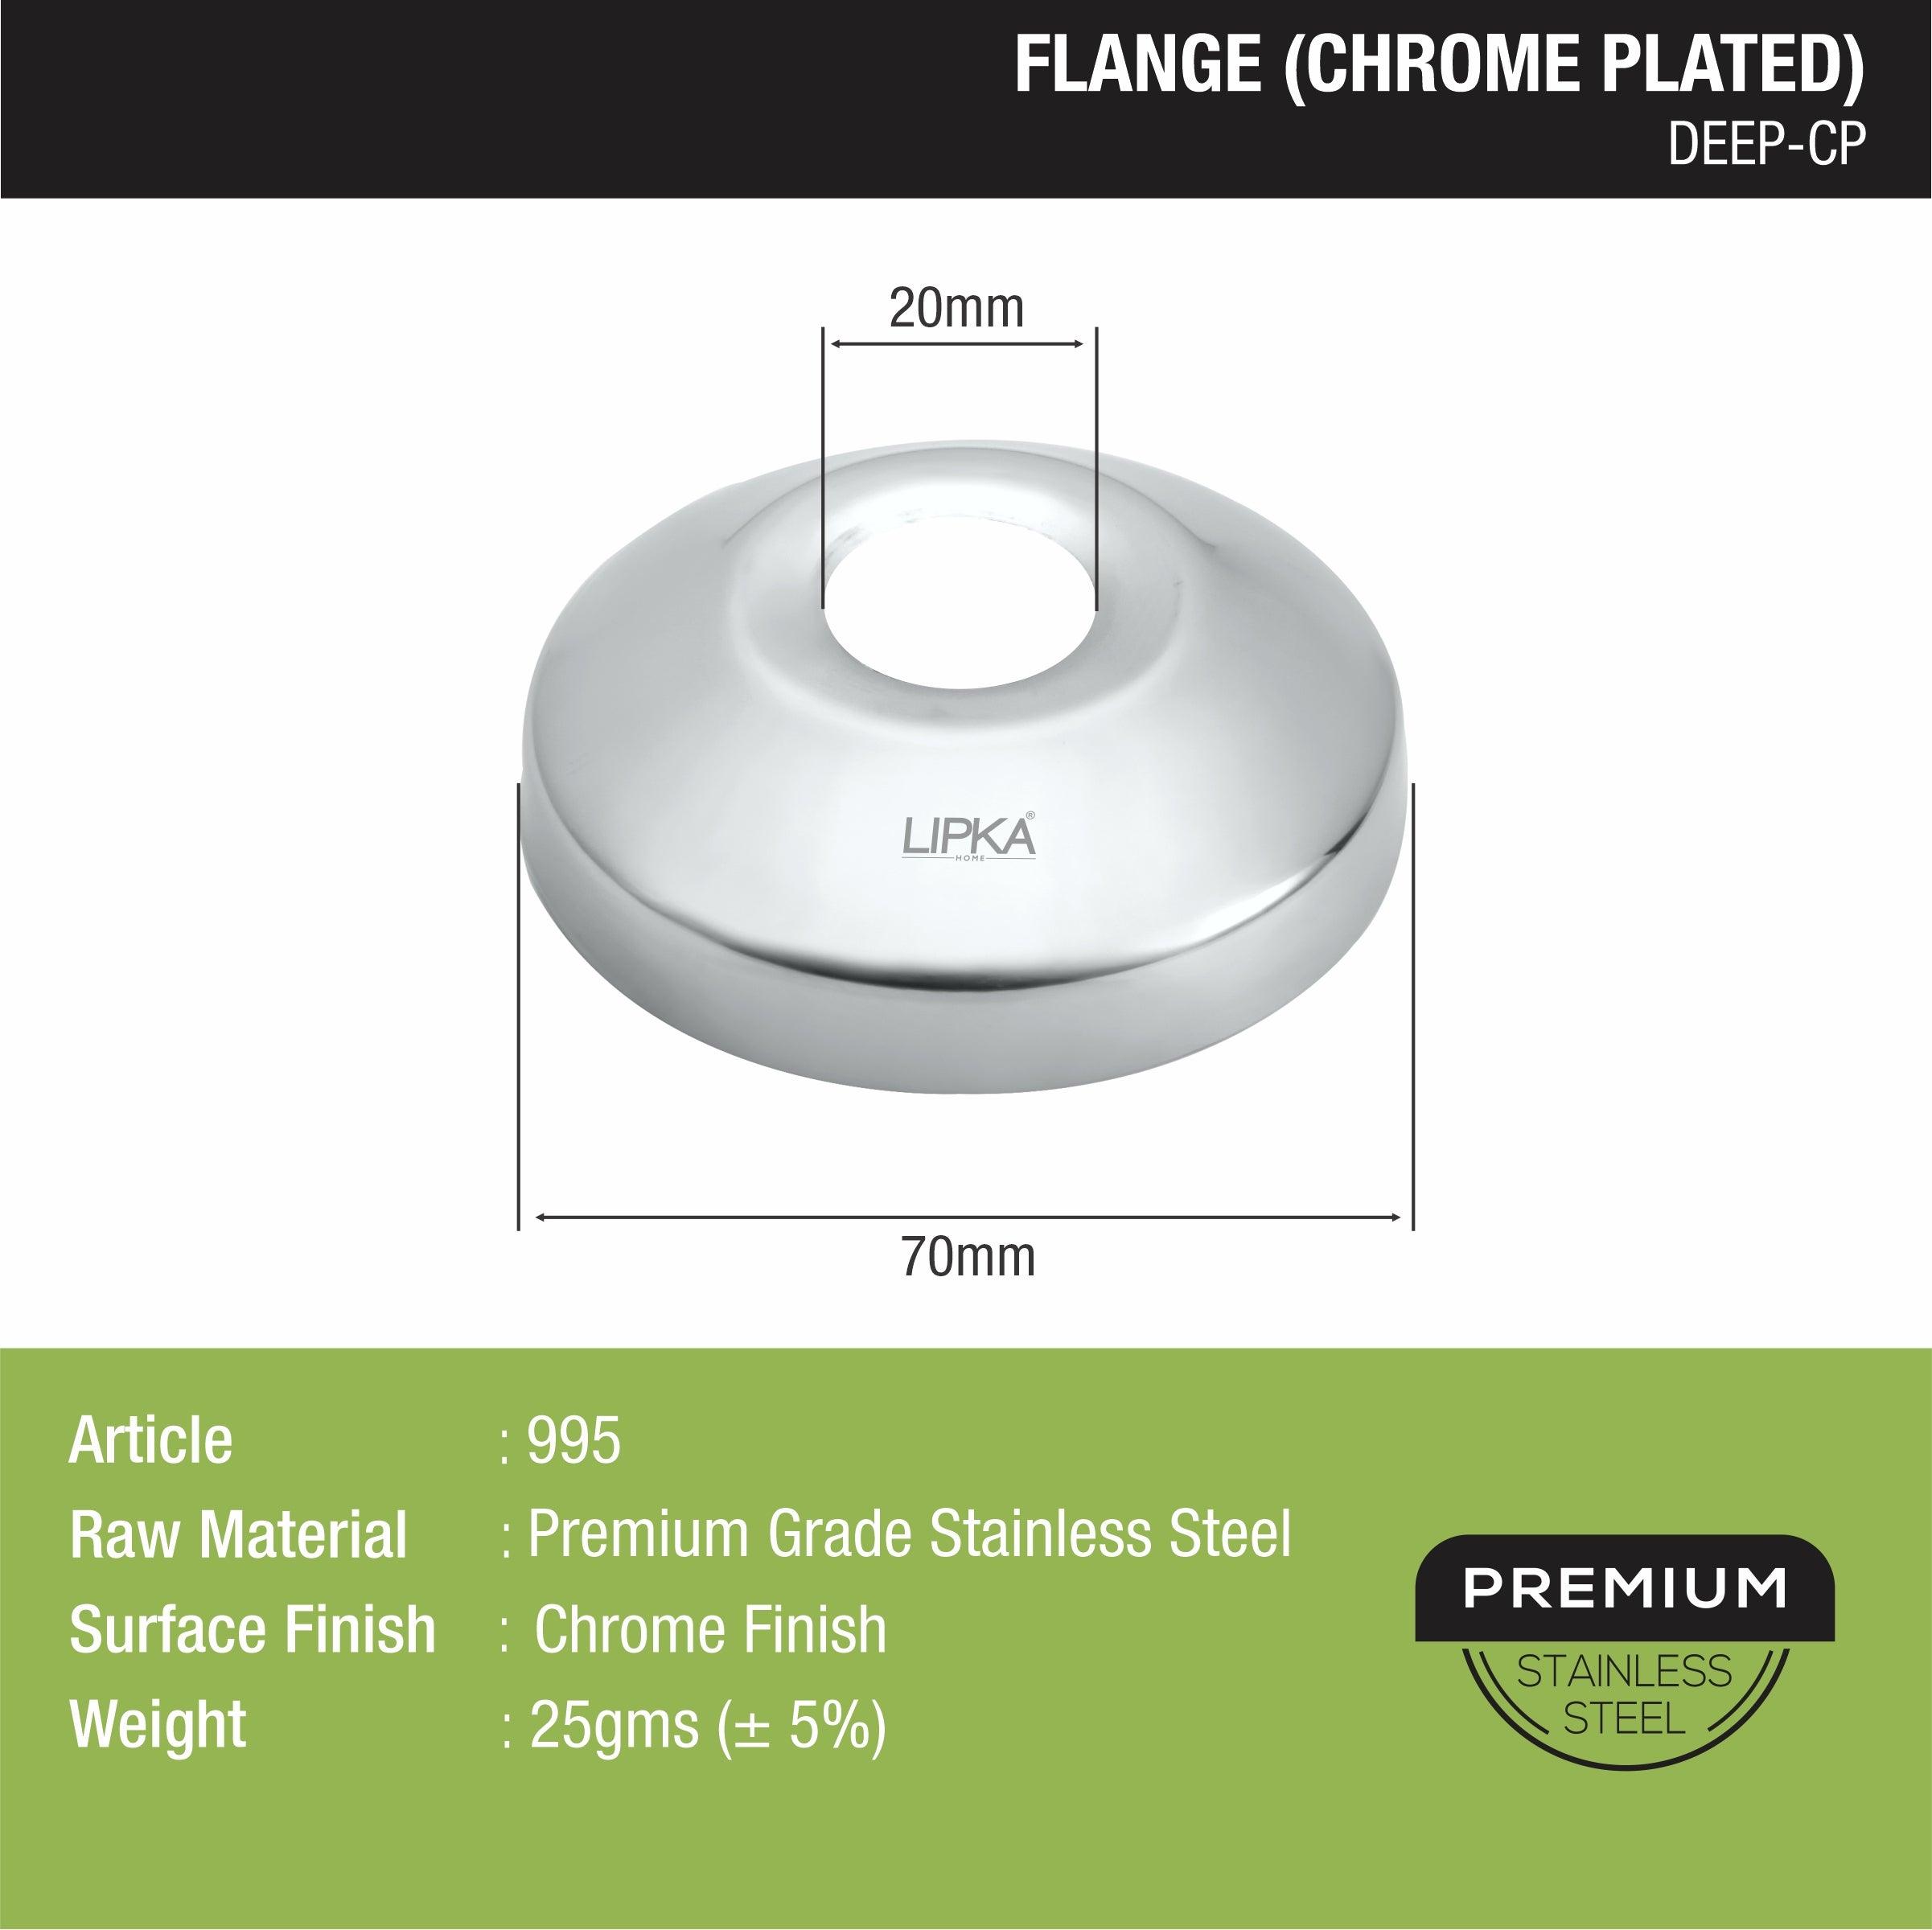 Deep Flange (Chrome Plated) sizes and dimensions